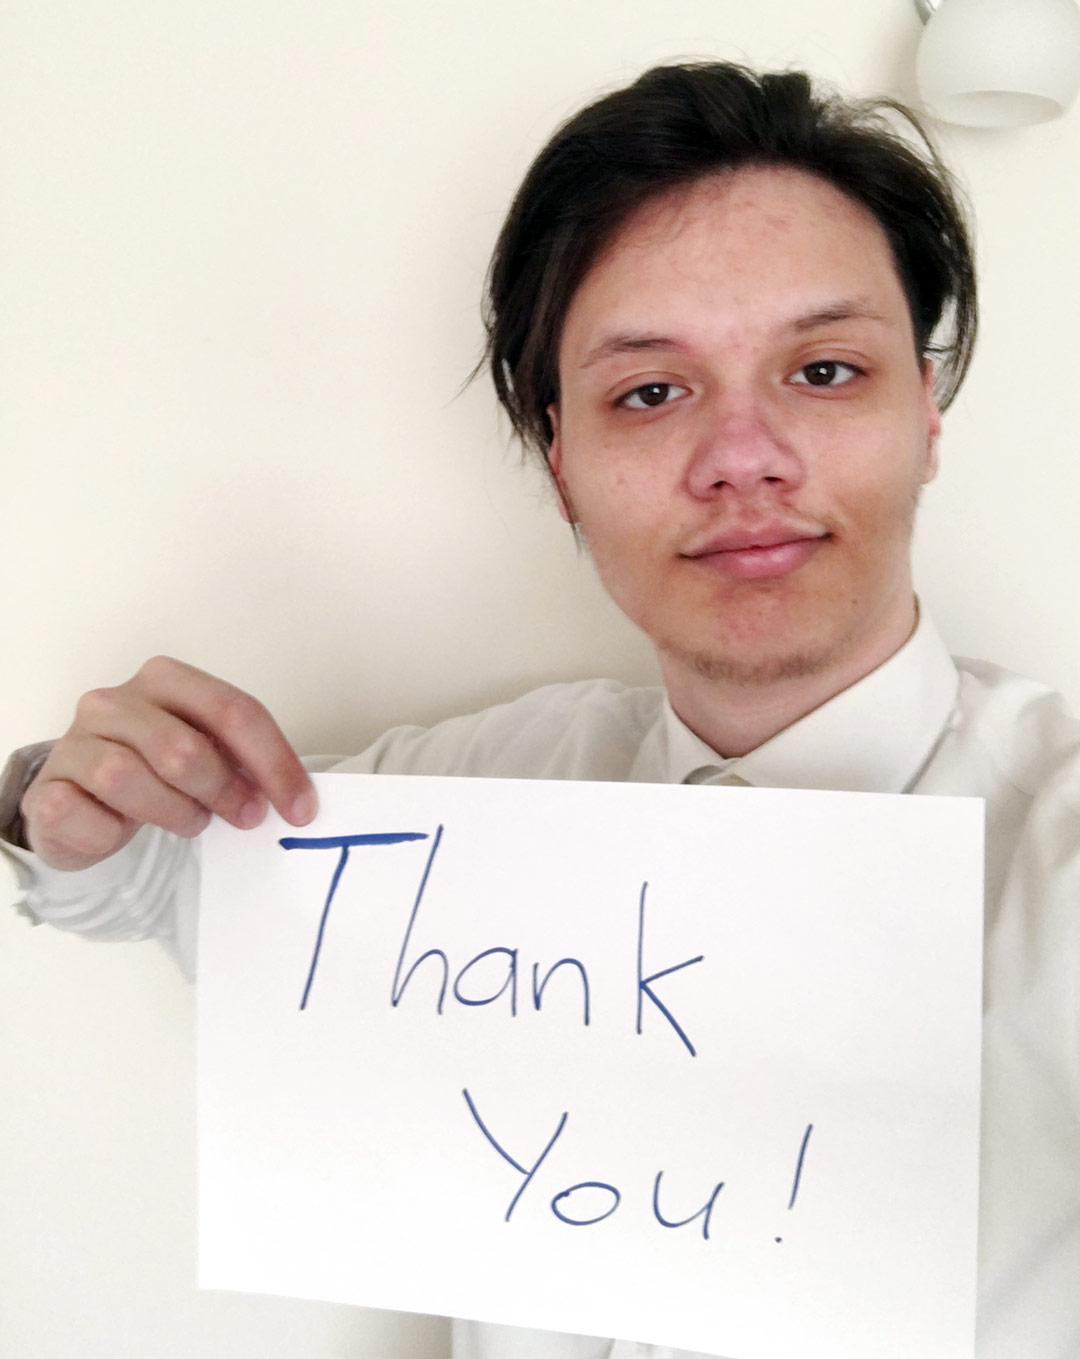 Makarii Yurkiv holds a sign that says 'thank you'